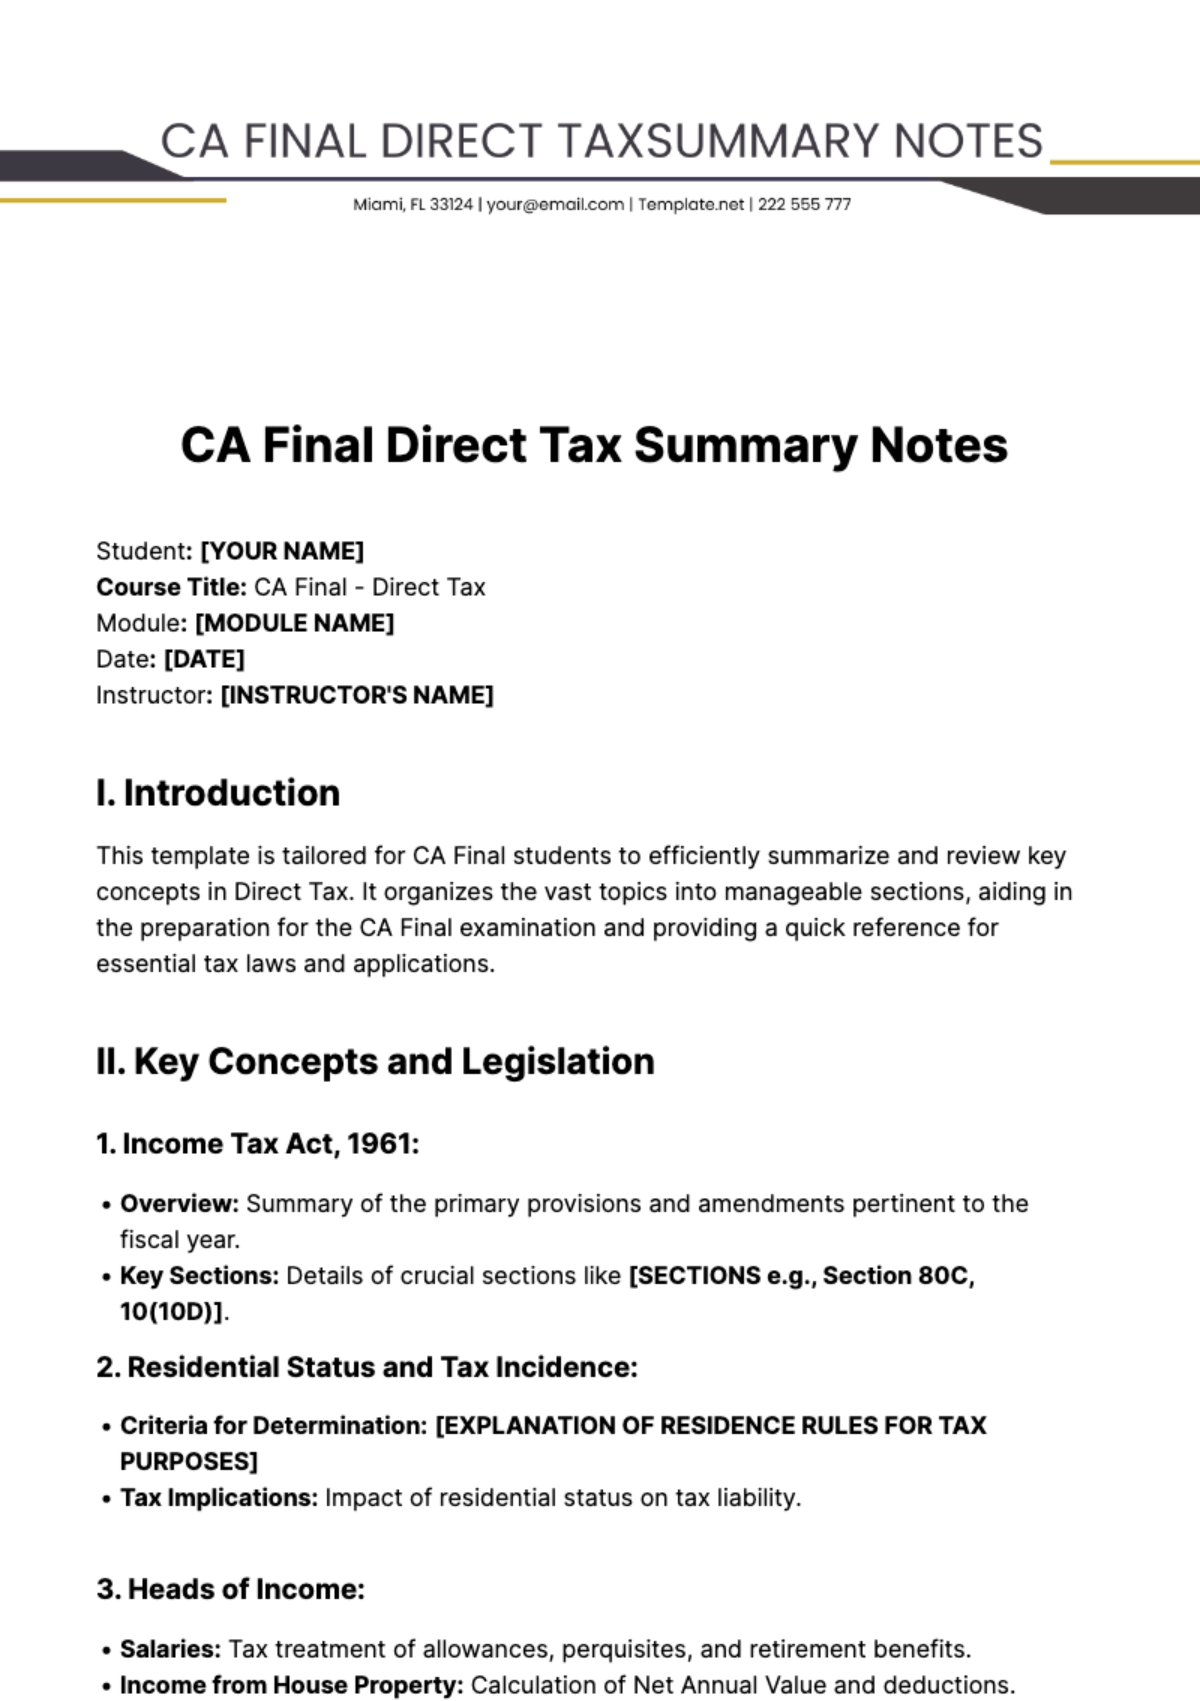 Free Ca Final Direct Tax Summary Notes Template